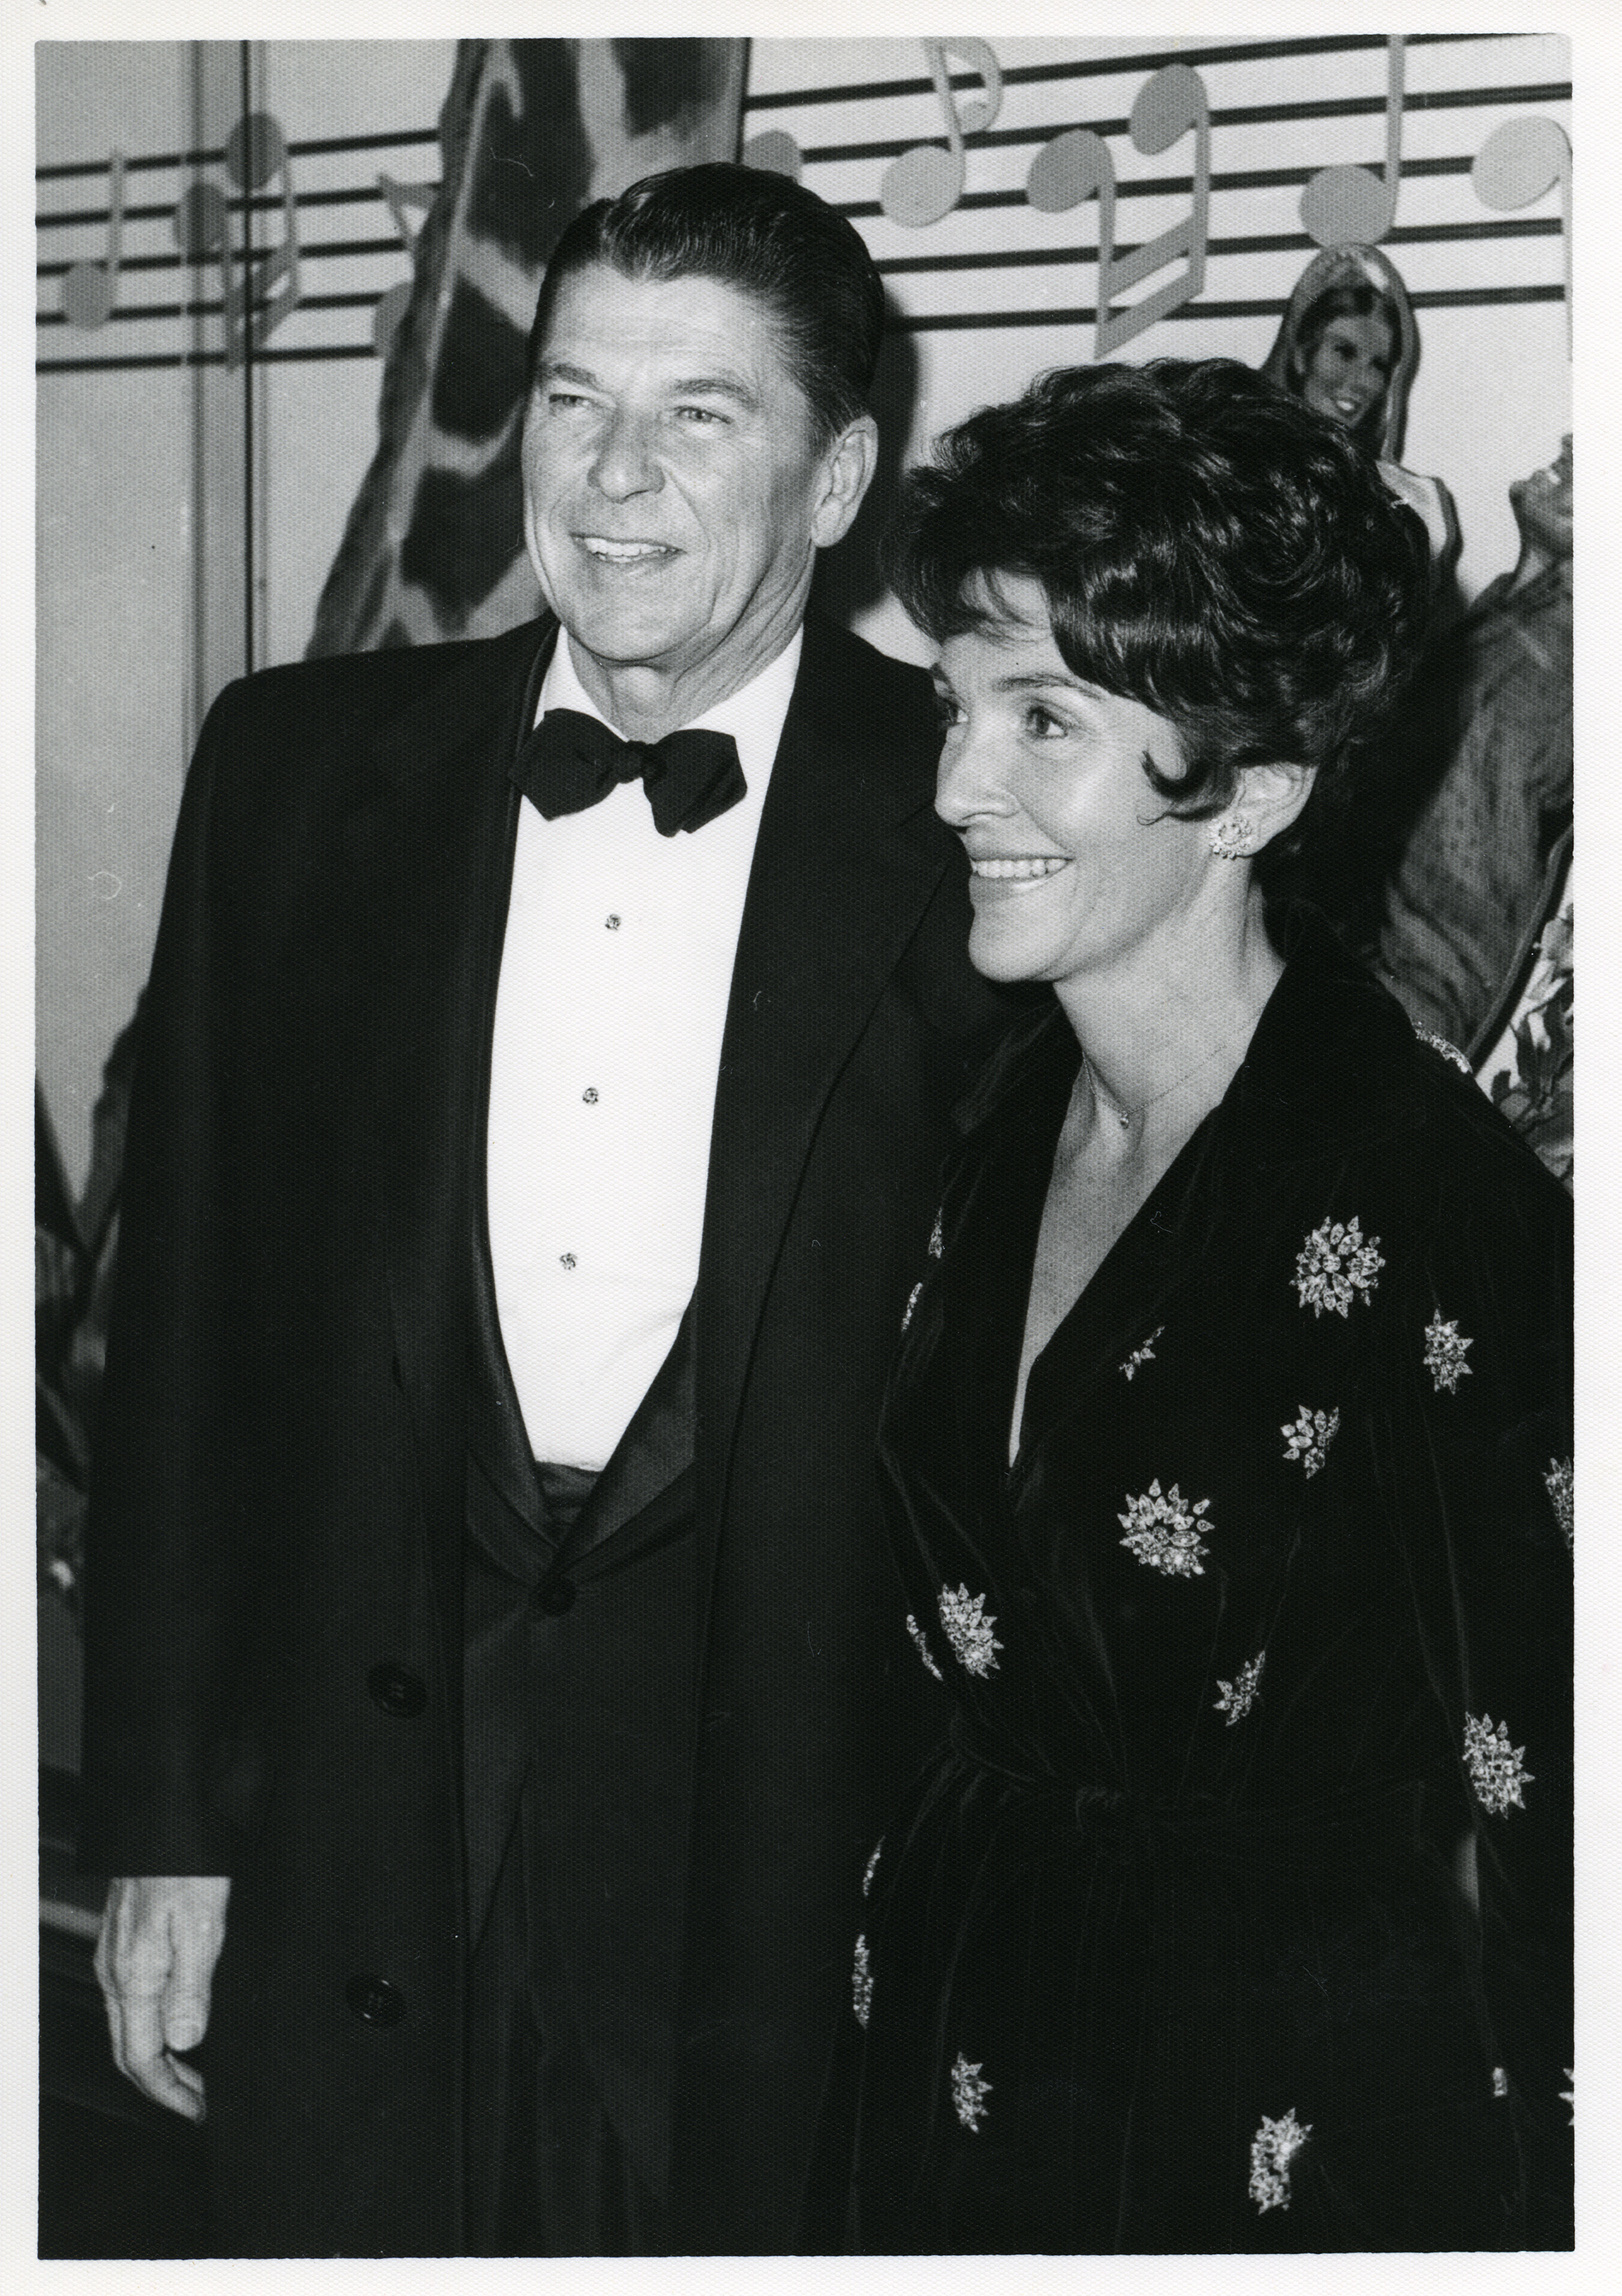 Ronald Reagan and Nancy Reagan at “Dr. Doolittle” movie premiere